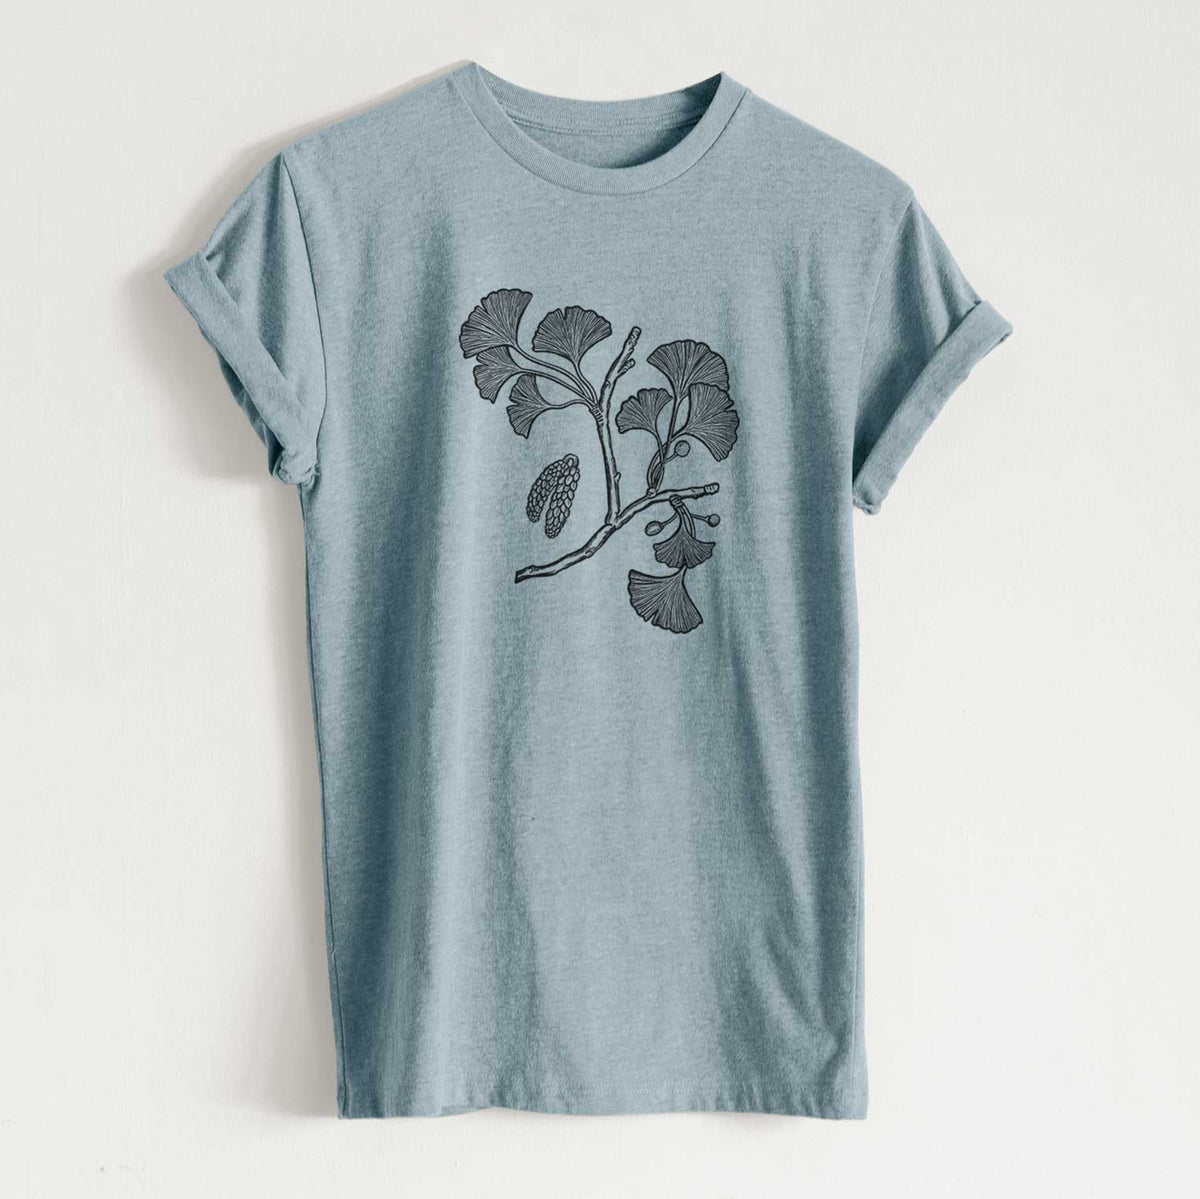 Ginkgo Biloba - Ginkgo Tree Stem with Leaves - Unisex Recycled Eco Tee  - CLOSEOUT - FINAL SALE